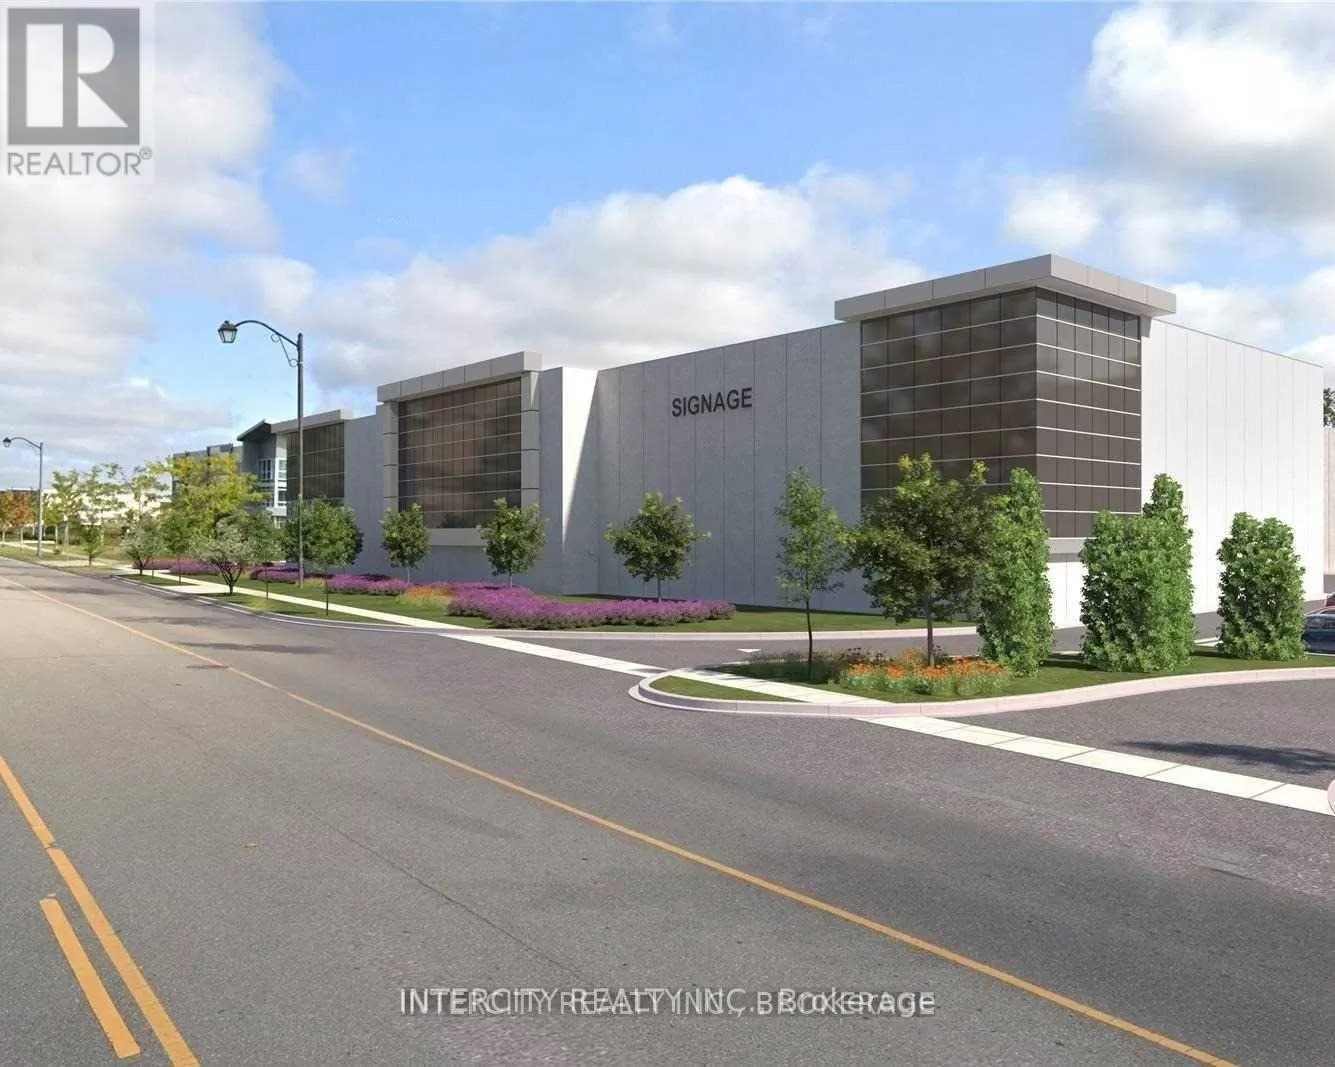 Warehouse for rent: 333 Cityview Boulevard, Vaughan, Ontario L4H 3M3